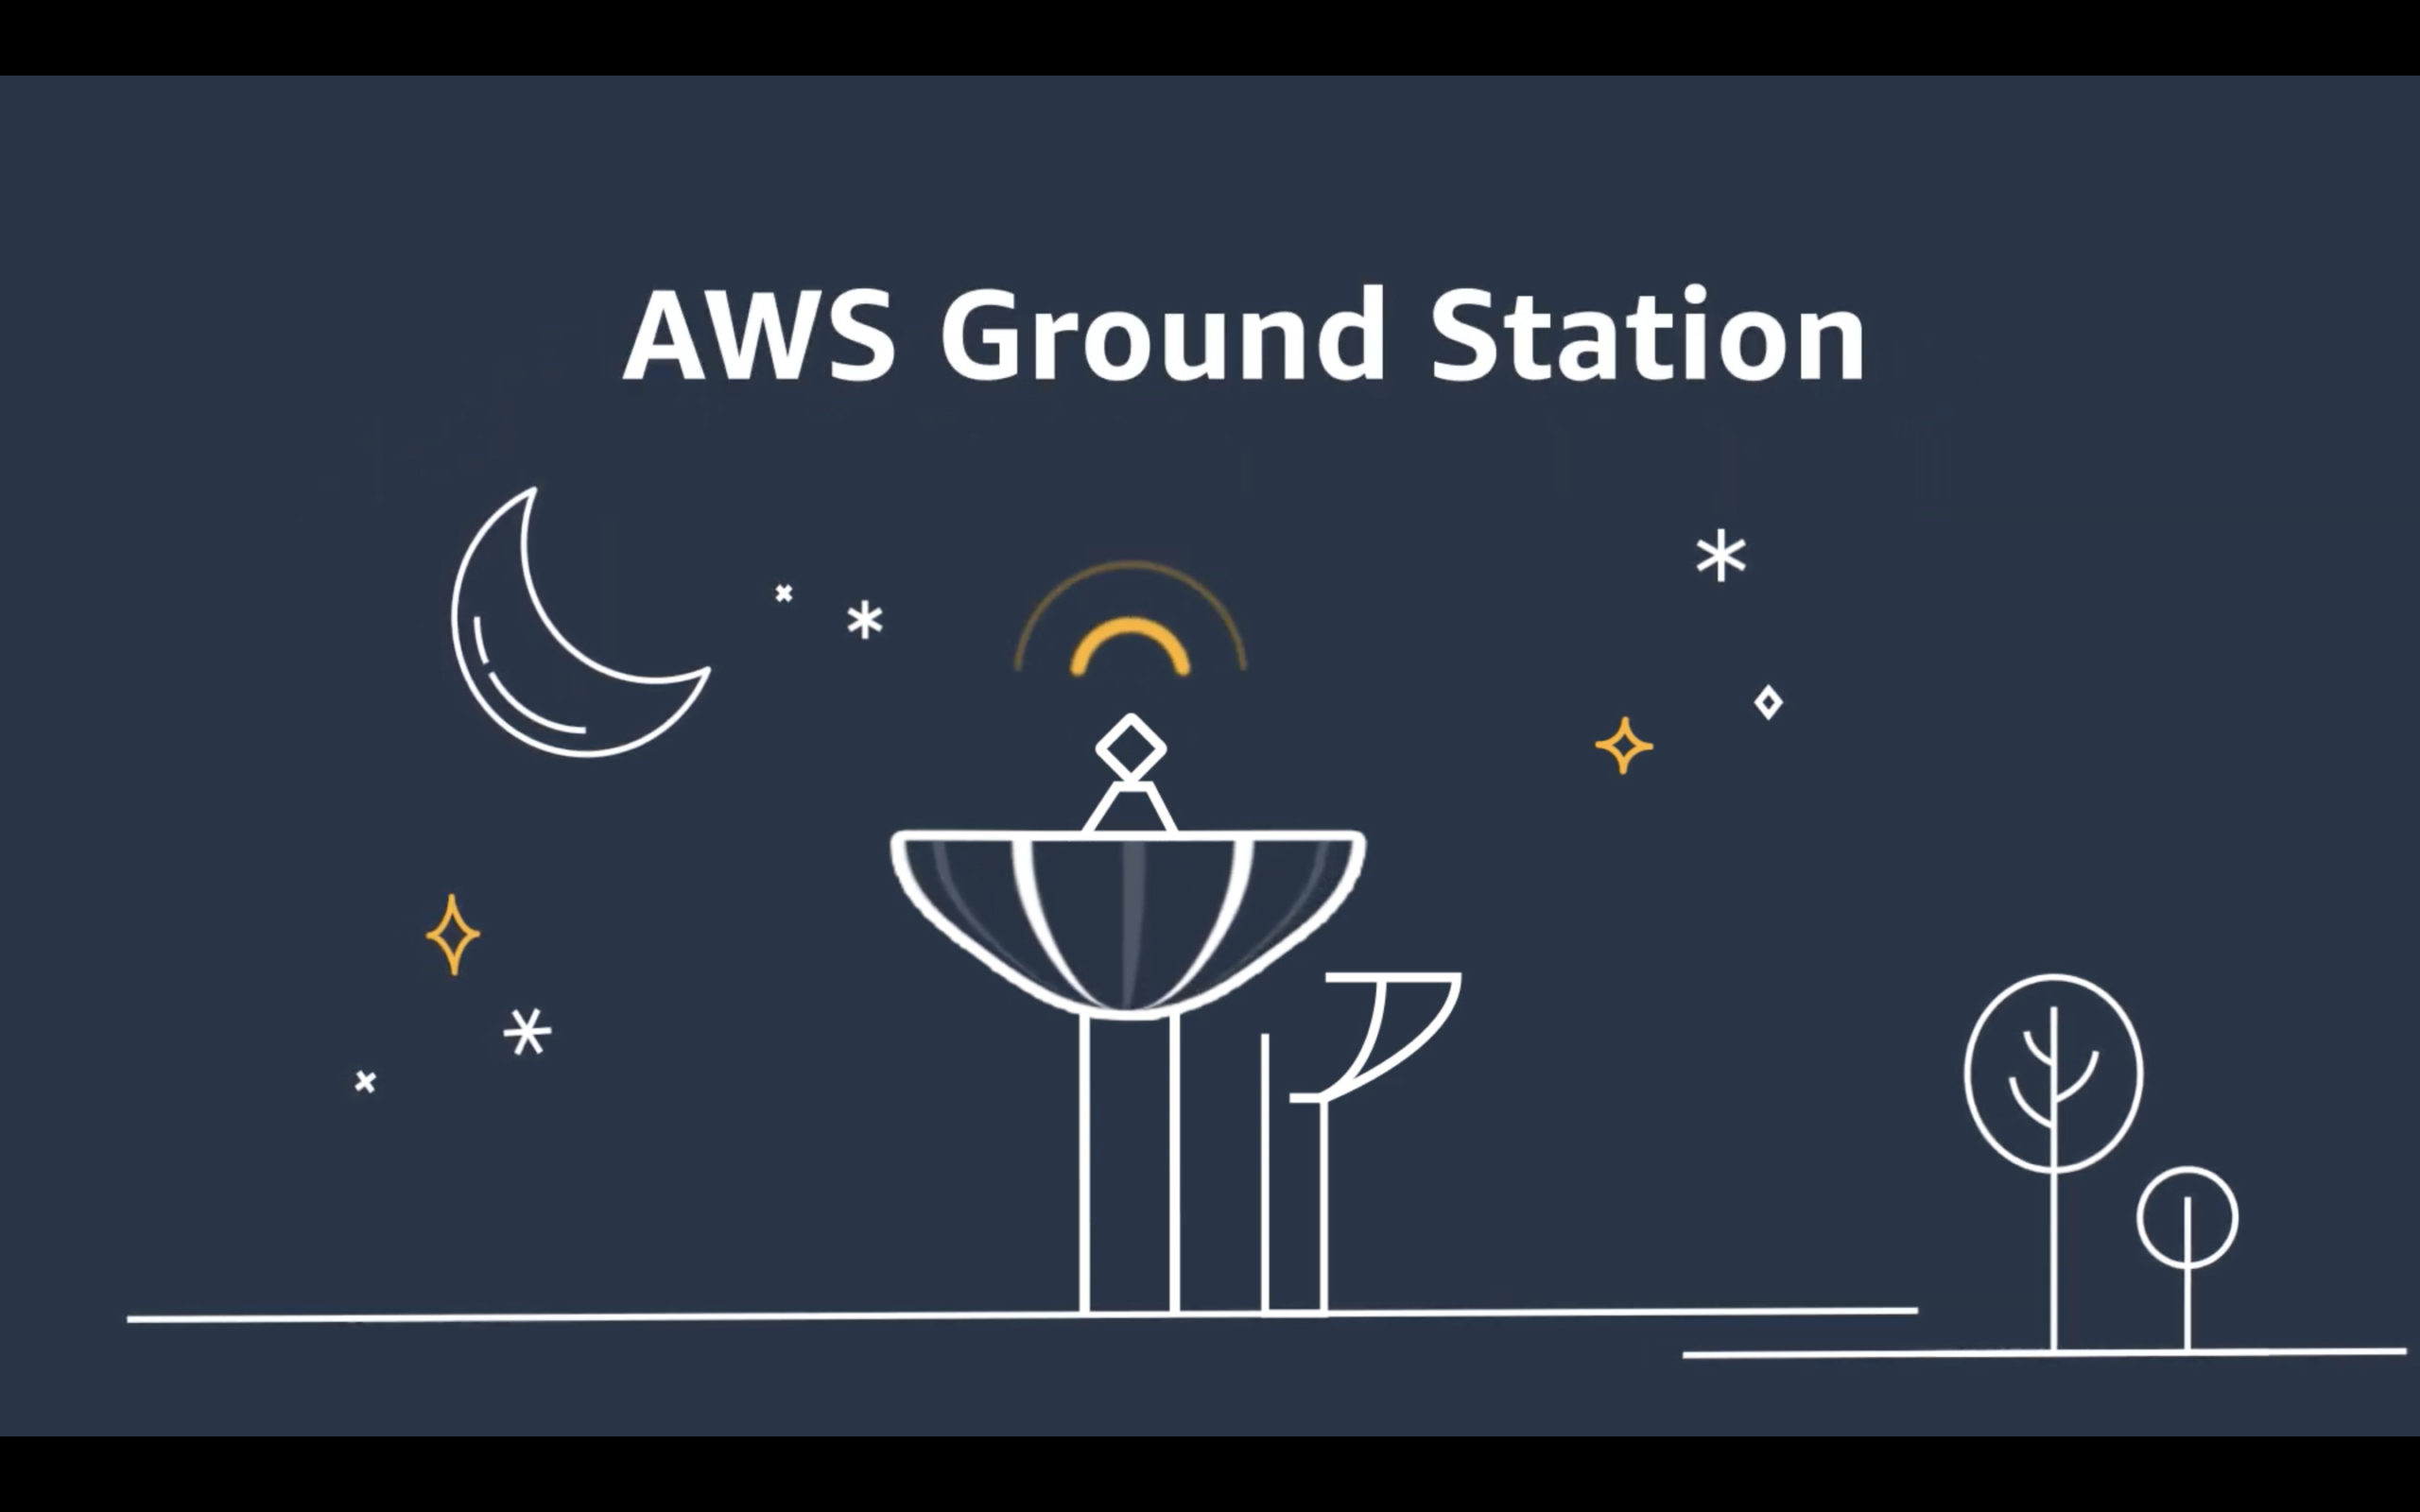 Screengrab from Amazon video about AWS Ground Station